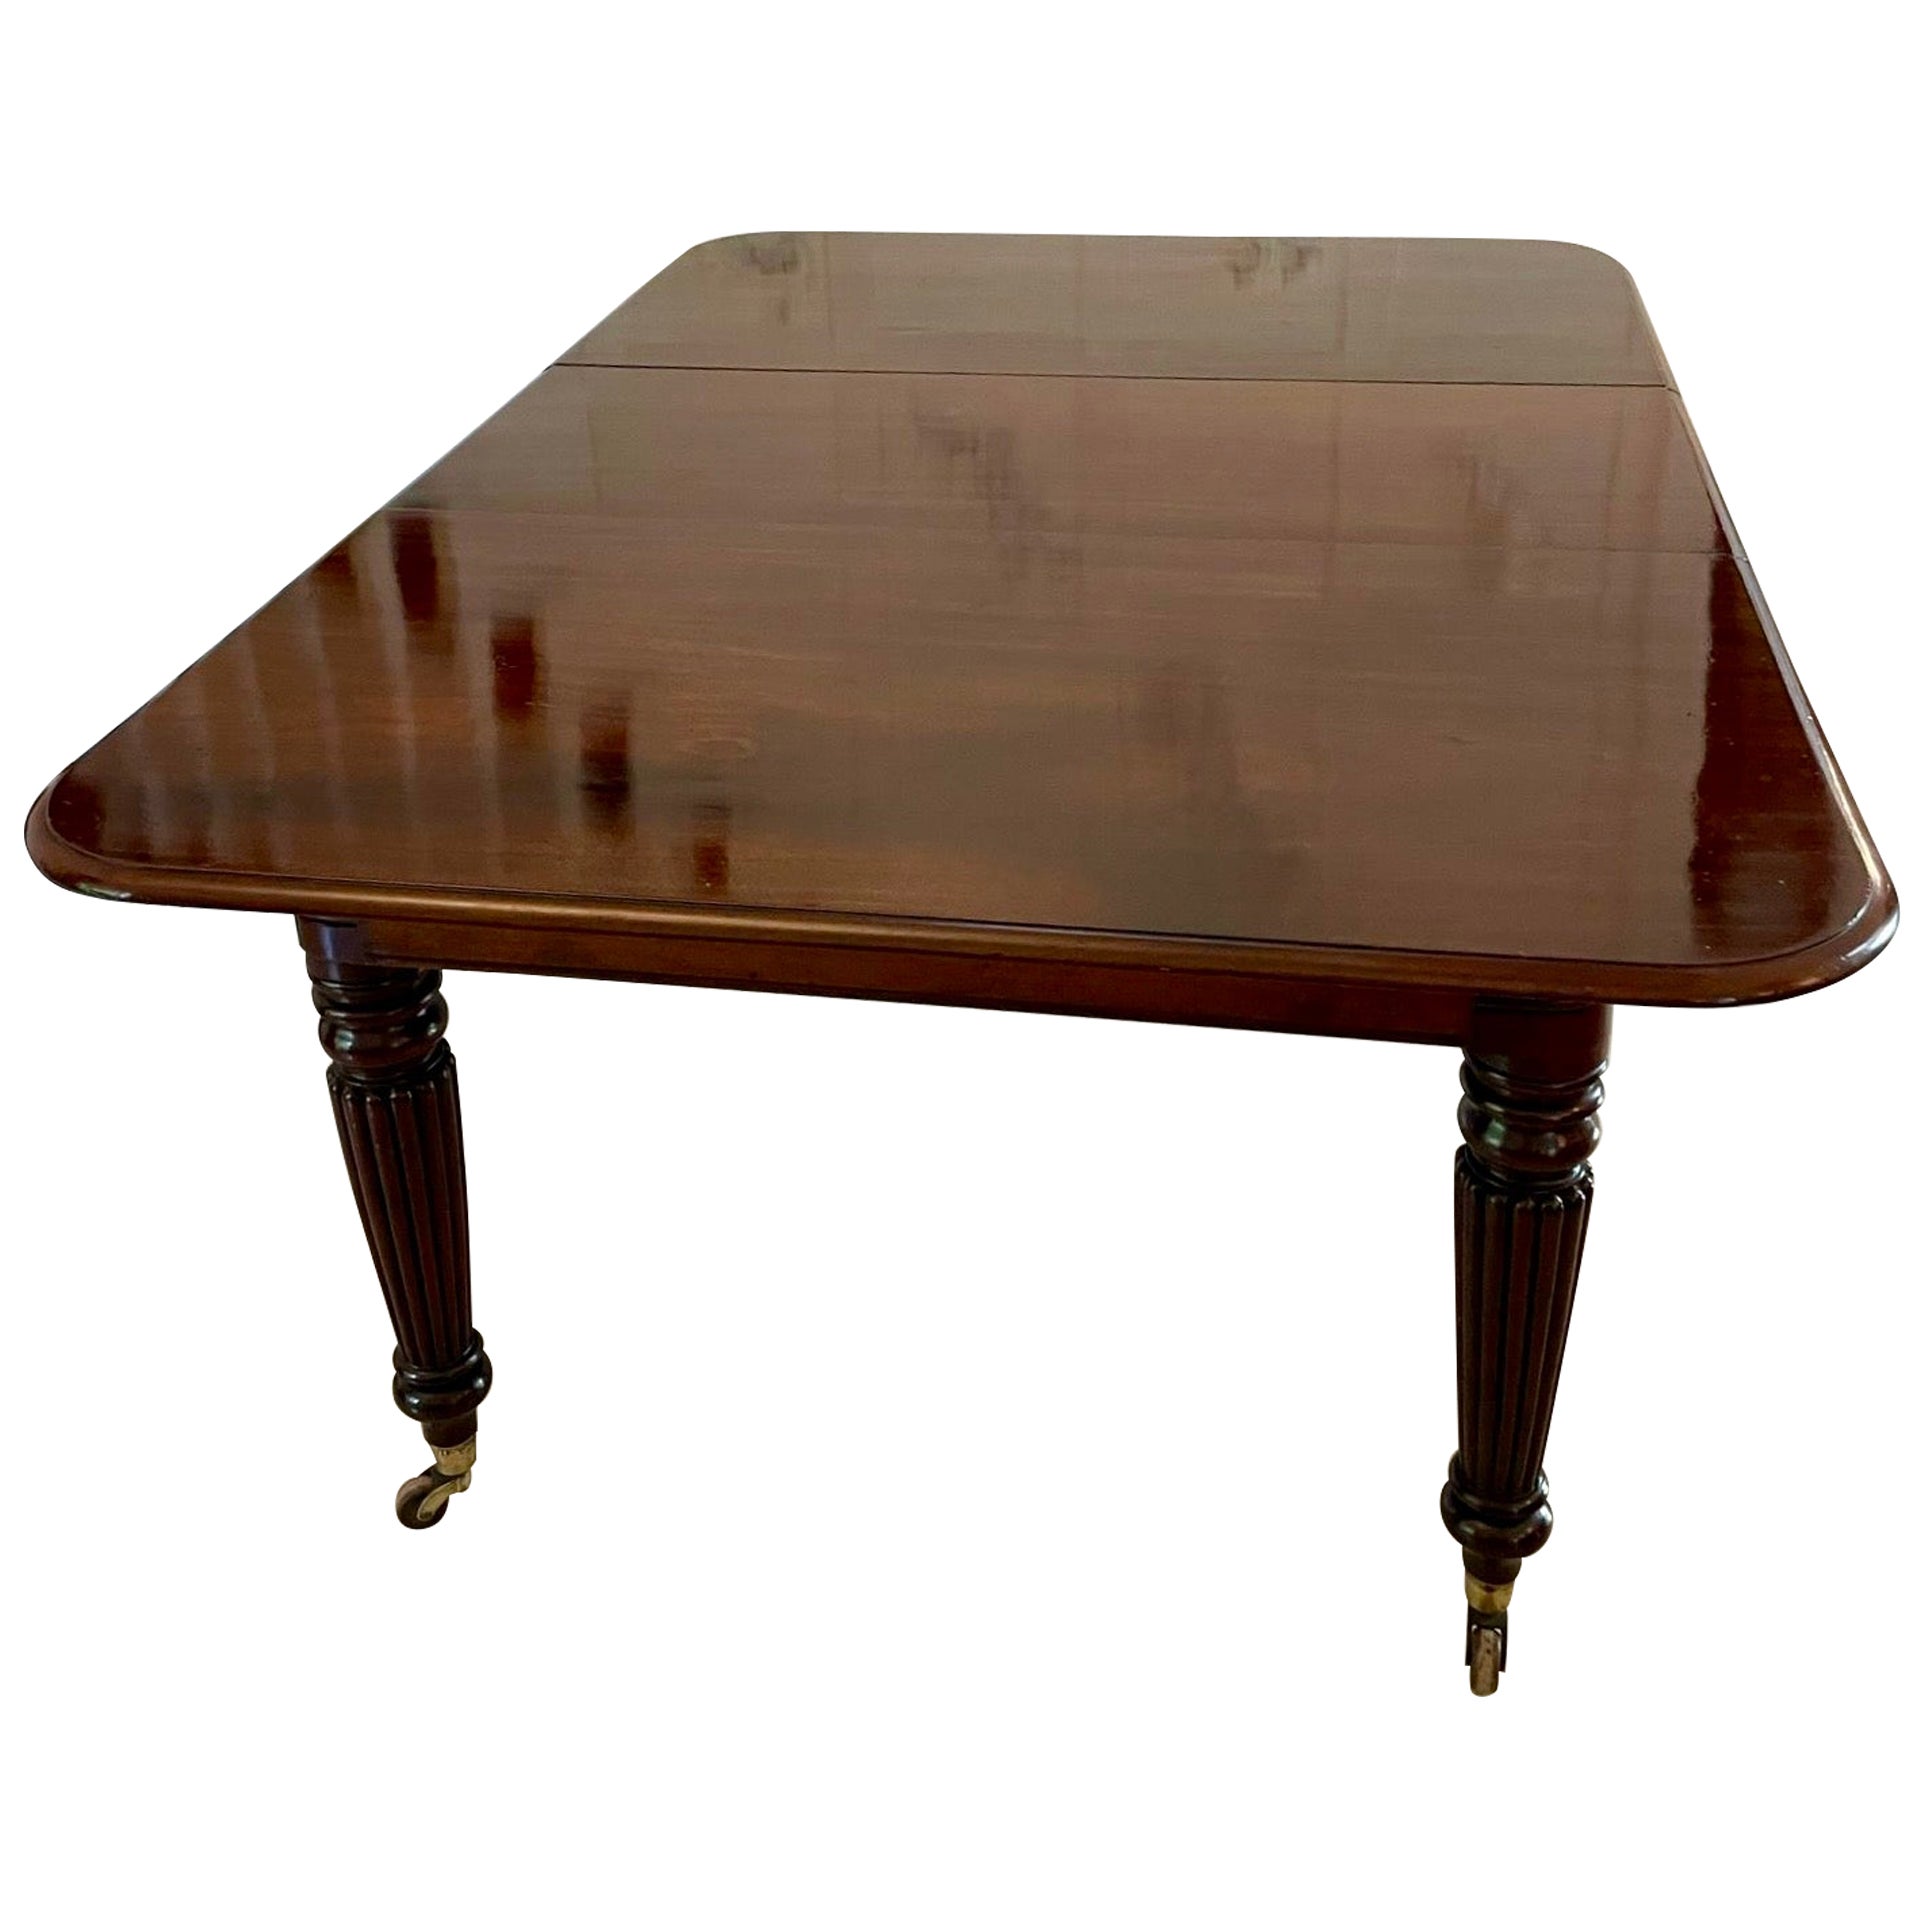 Outstanding Quality Antique Regency Figured Mahogany Extending Dining Table  For Sale